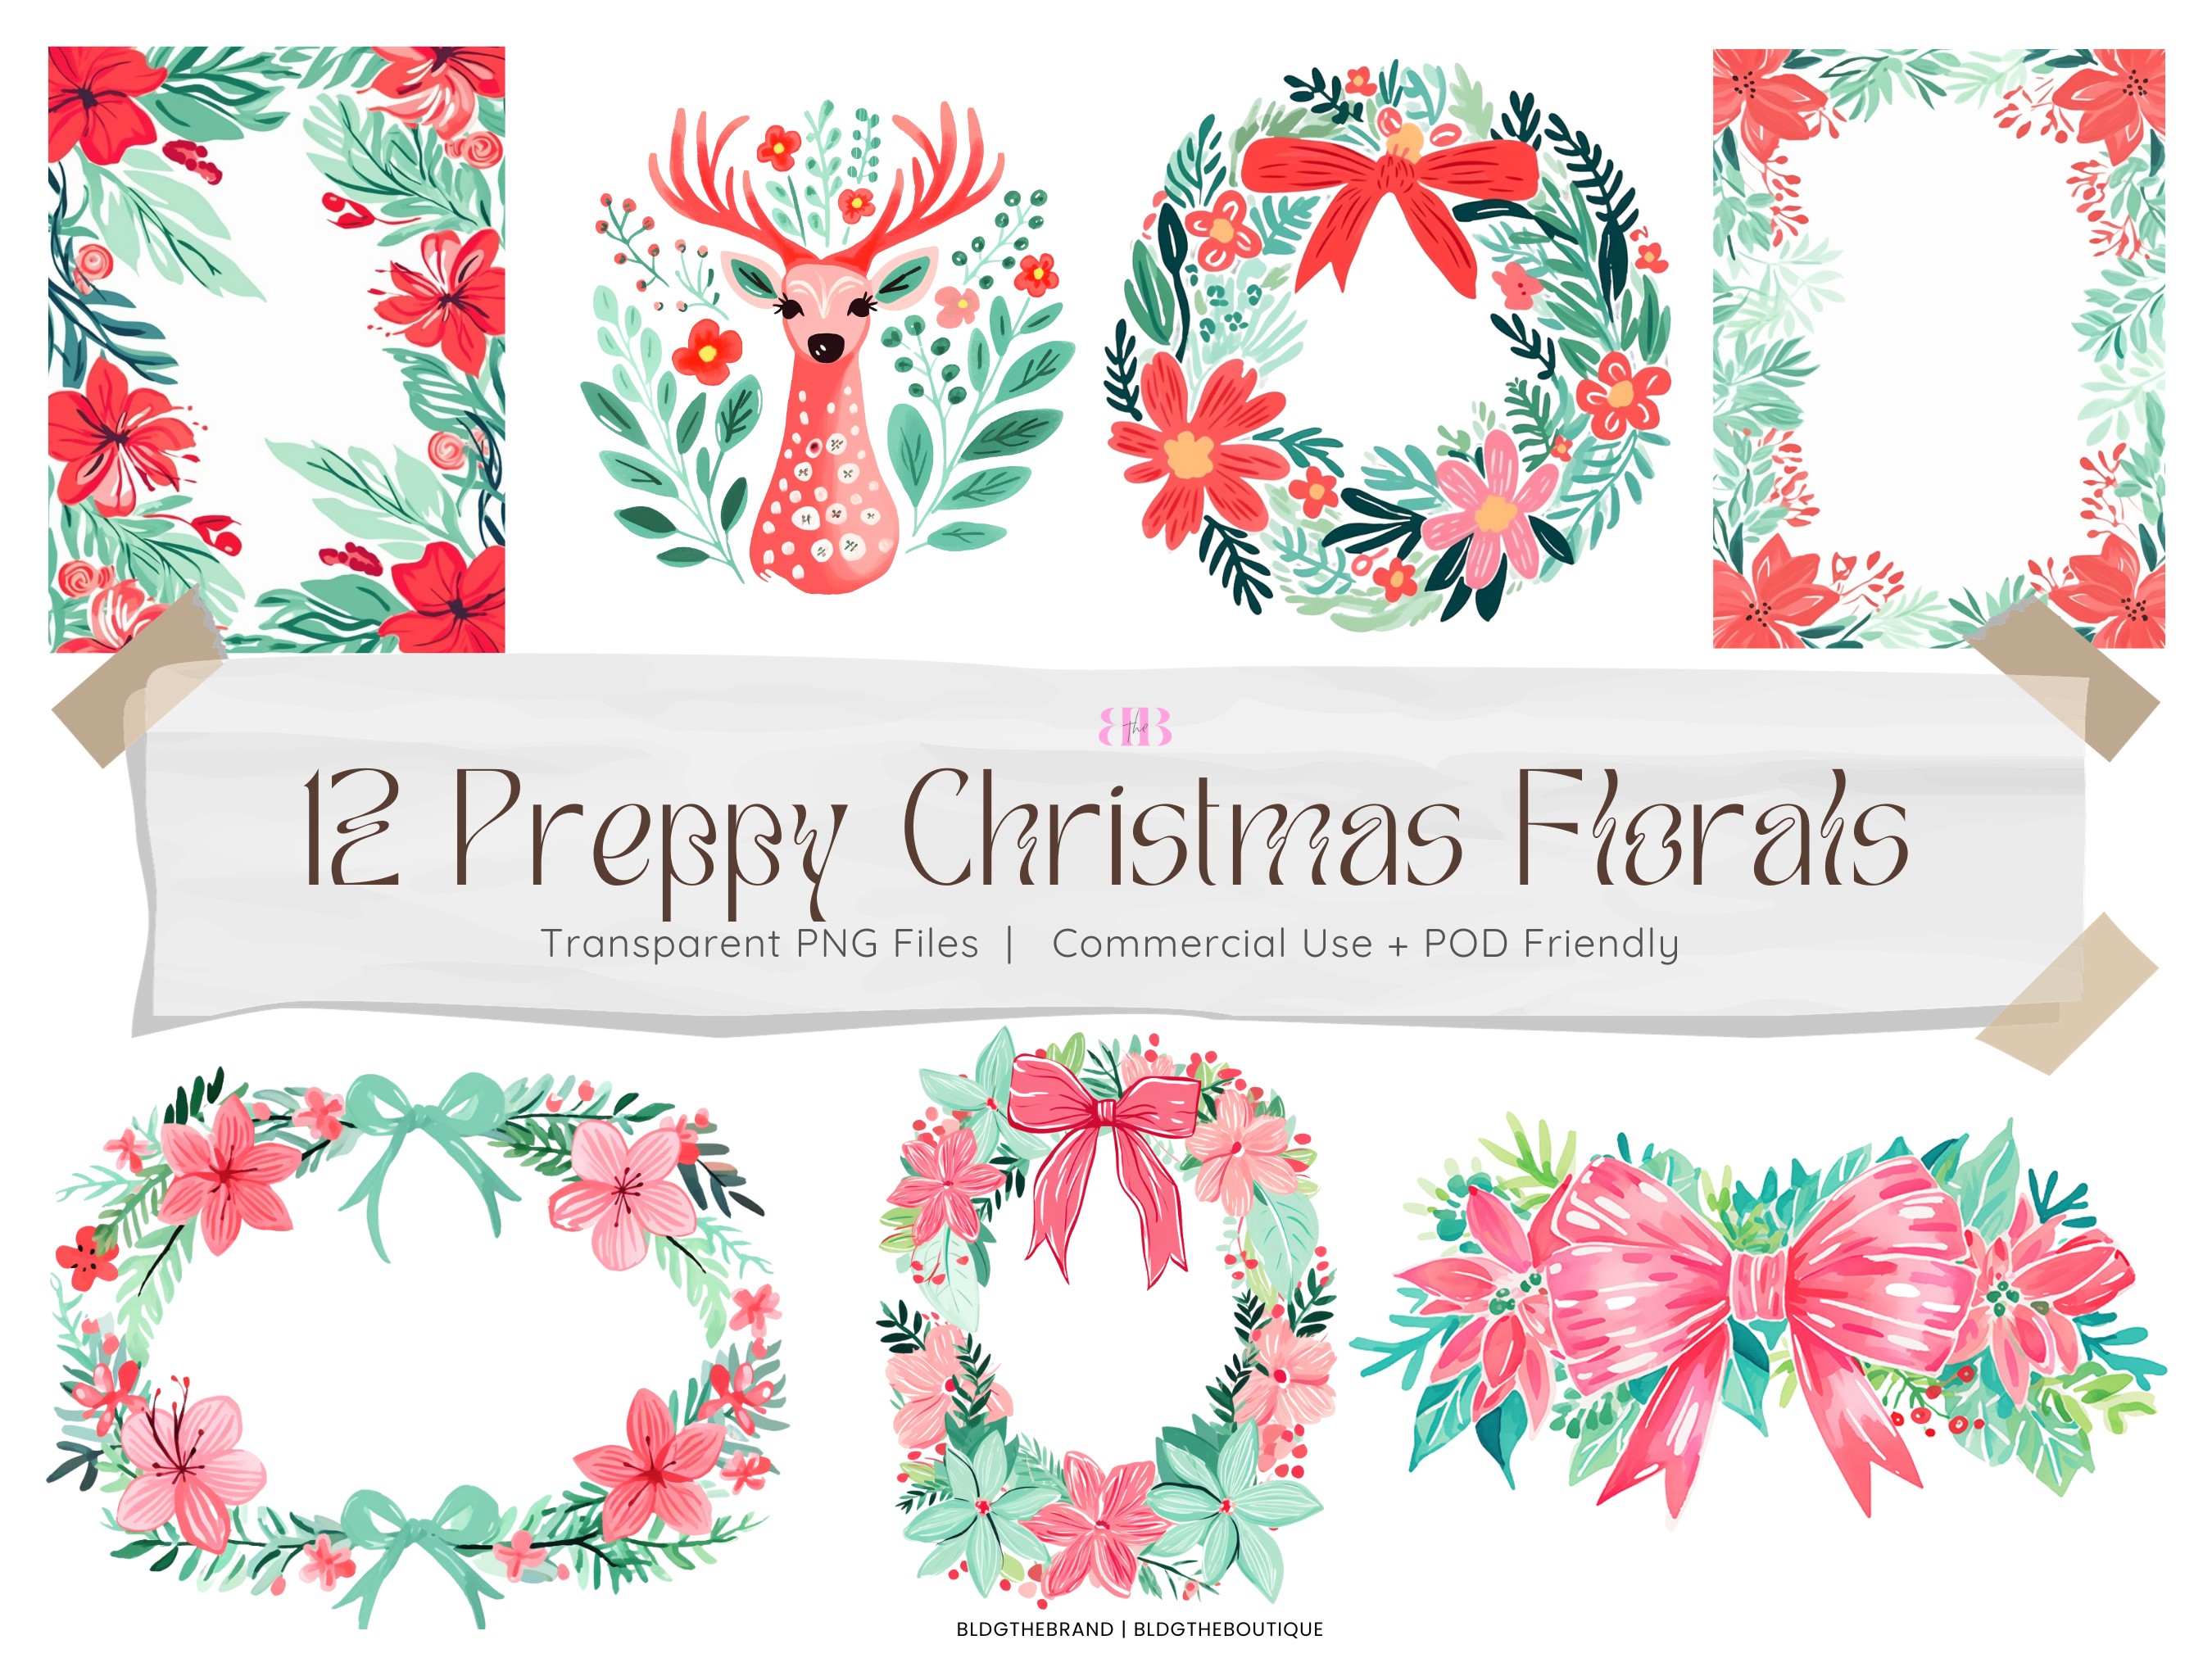 Preppy Christmas Floral Border PNG Files Graphic by BLDGtheBrand